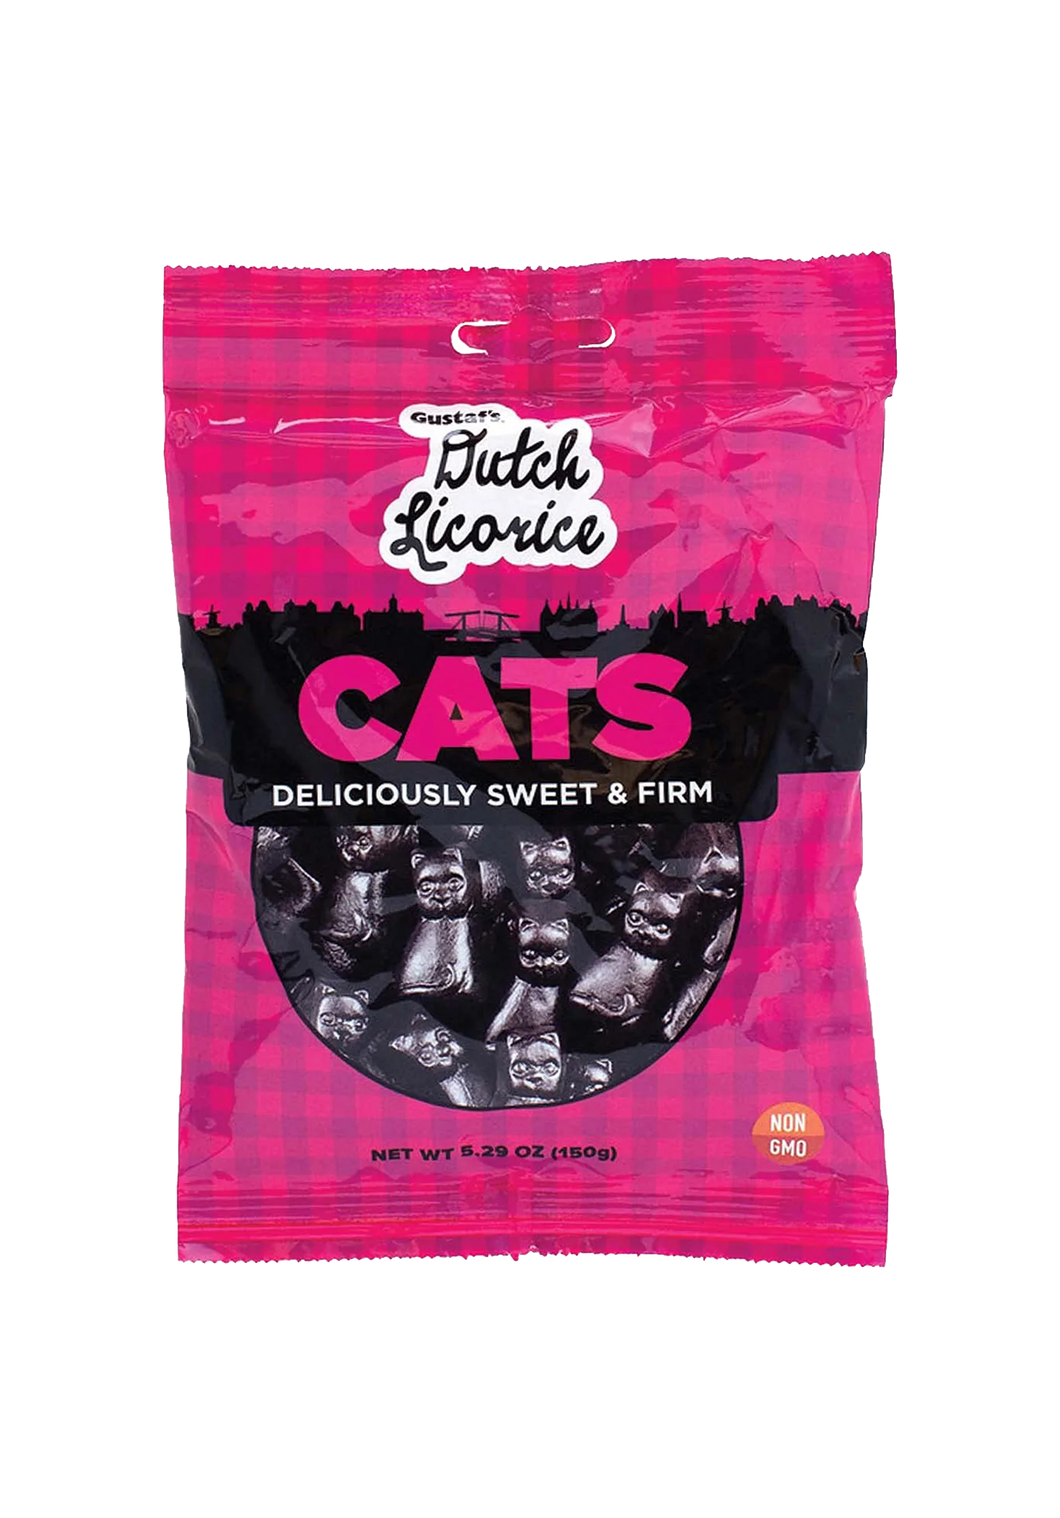 Gustaf's Dutch Licorice Cats Deliciously Sweet & Firm 150g